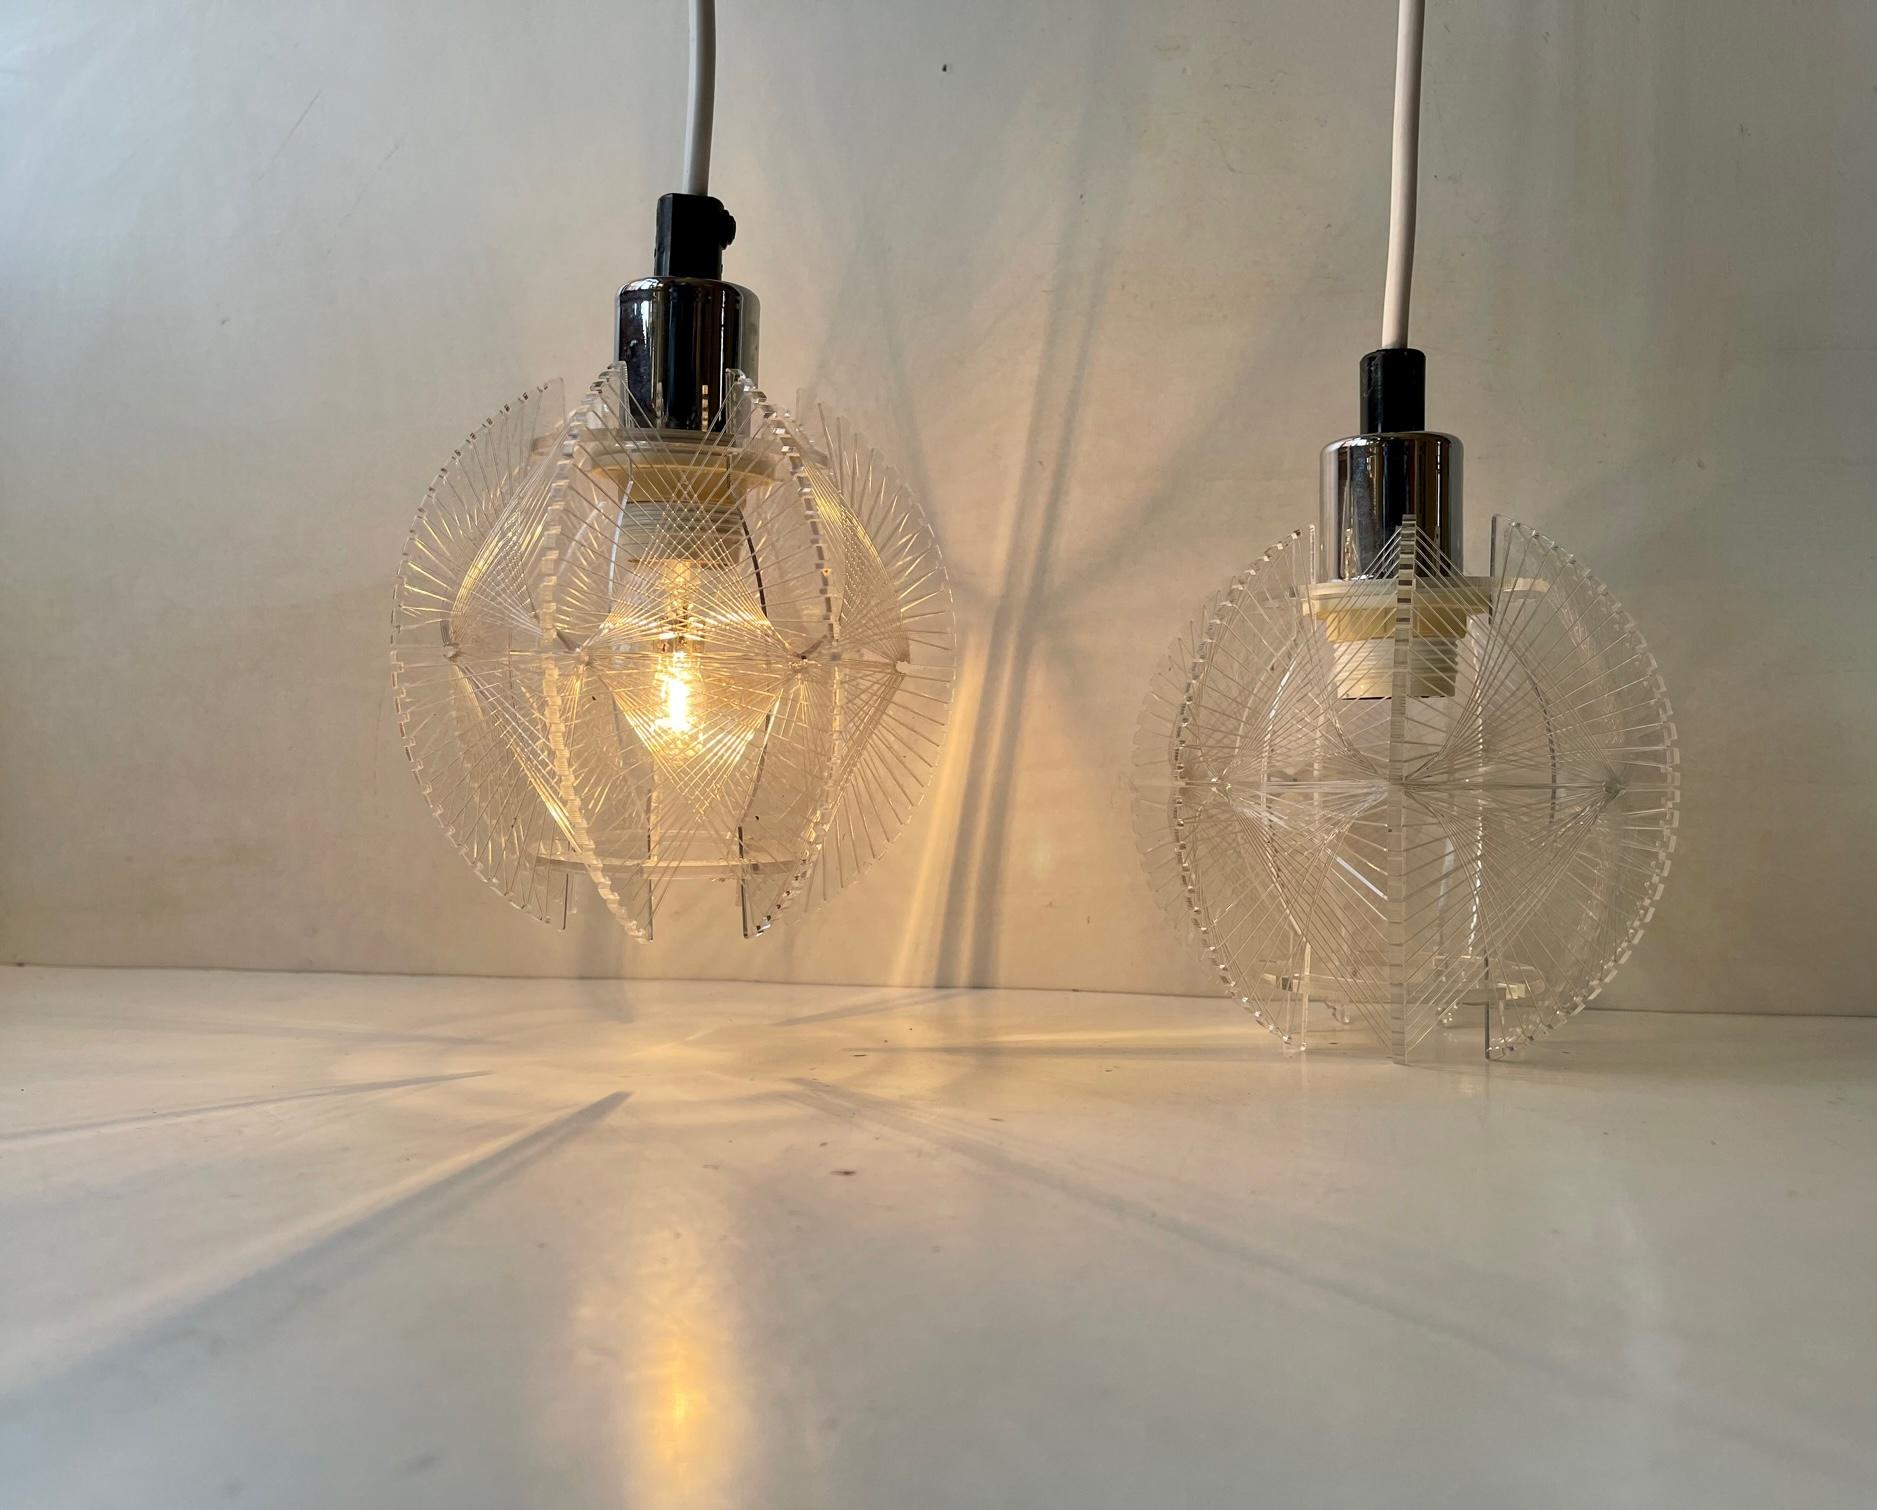 Acrylic Modernist Lucite & String Ceiling Lamps by Paul Secon for Sompex, Germany, 1970s For Sale